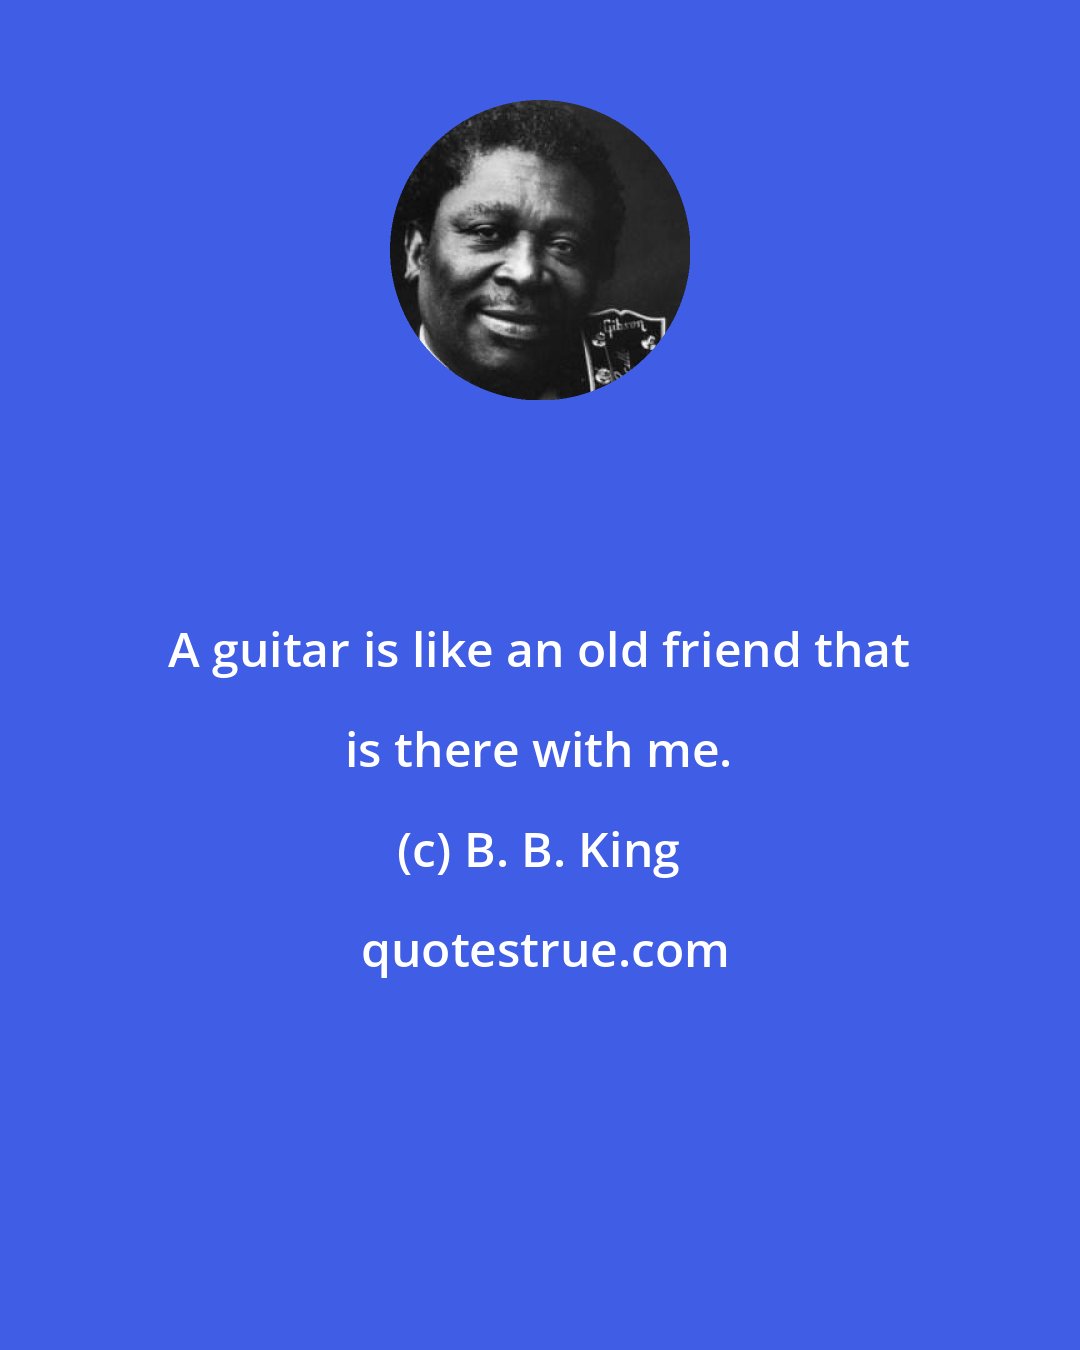 B. B. King: A guitar is like an old friend that is there with me.